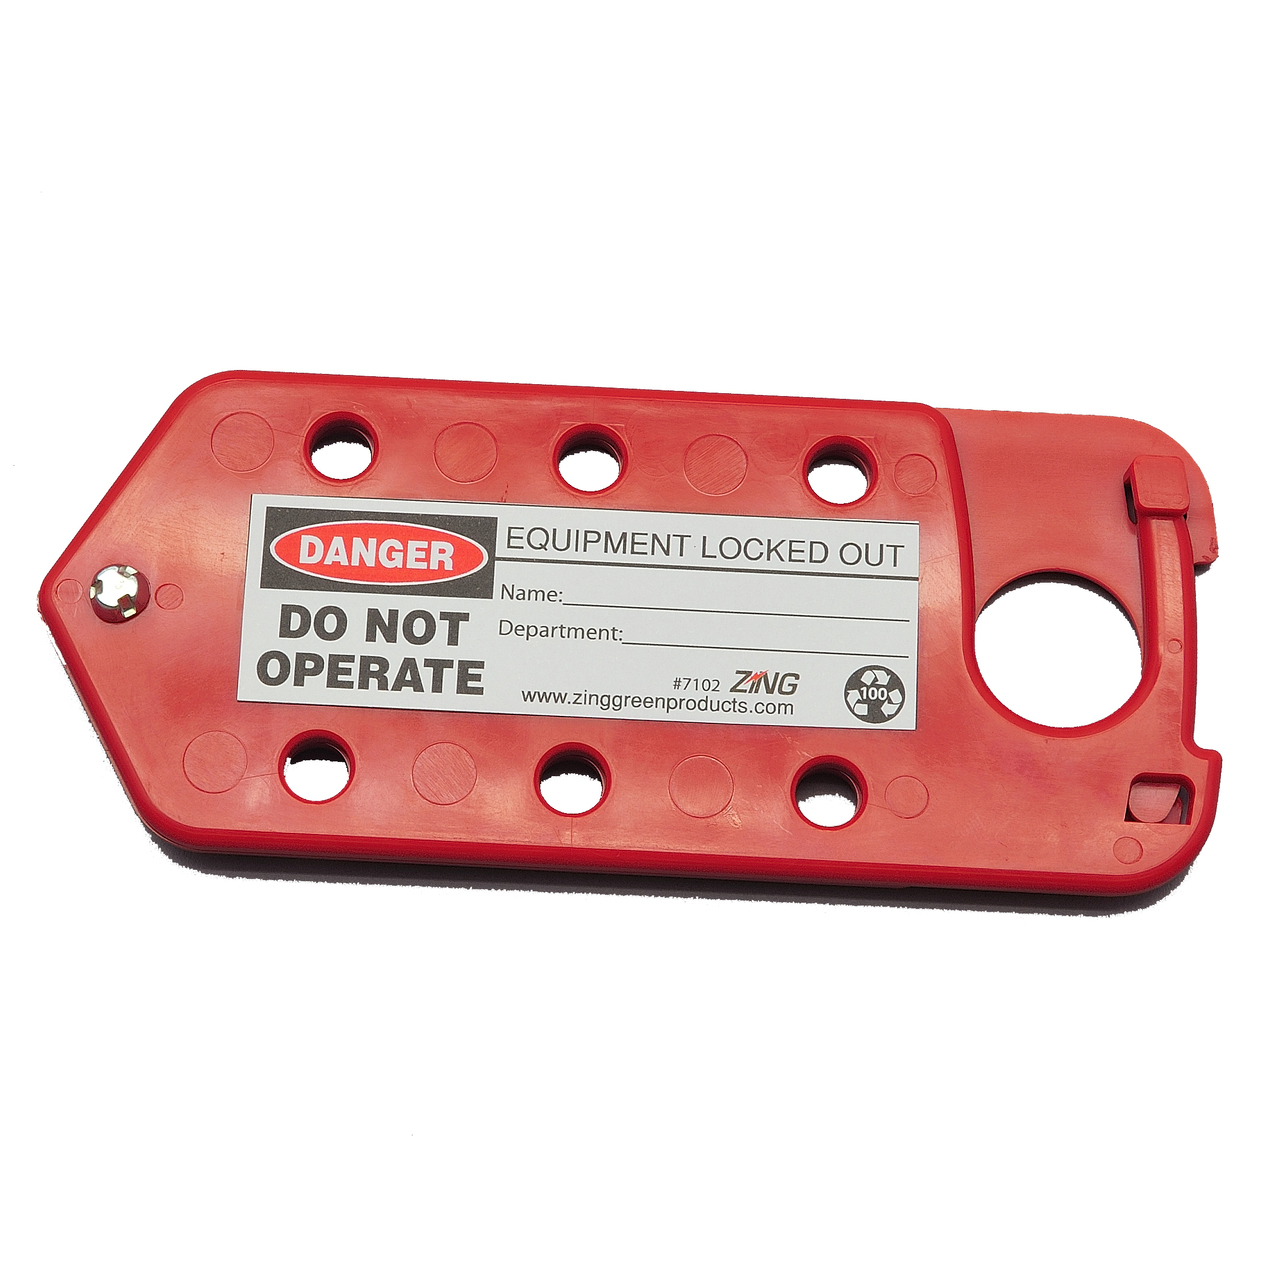 ZING RecycLockout Lockout Tagout Hasp and Tag Combination, Recycled Plastic